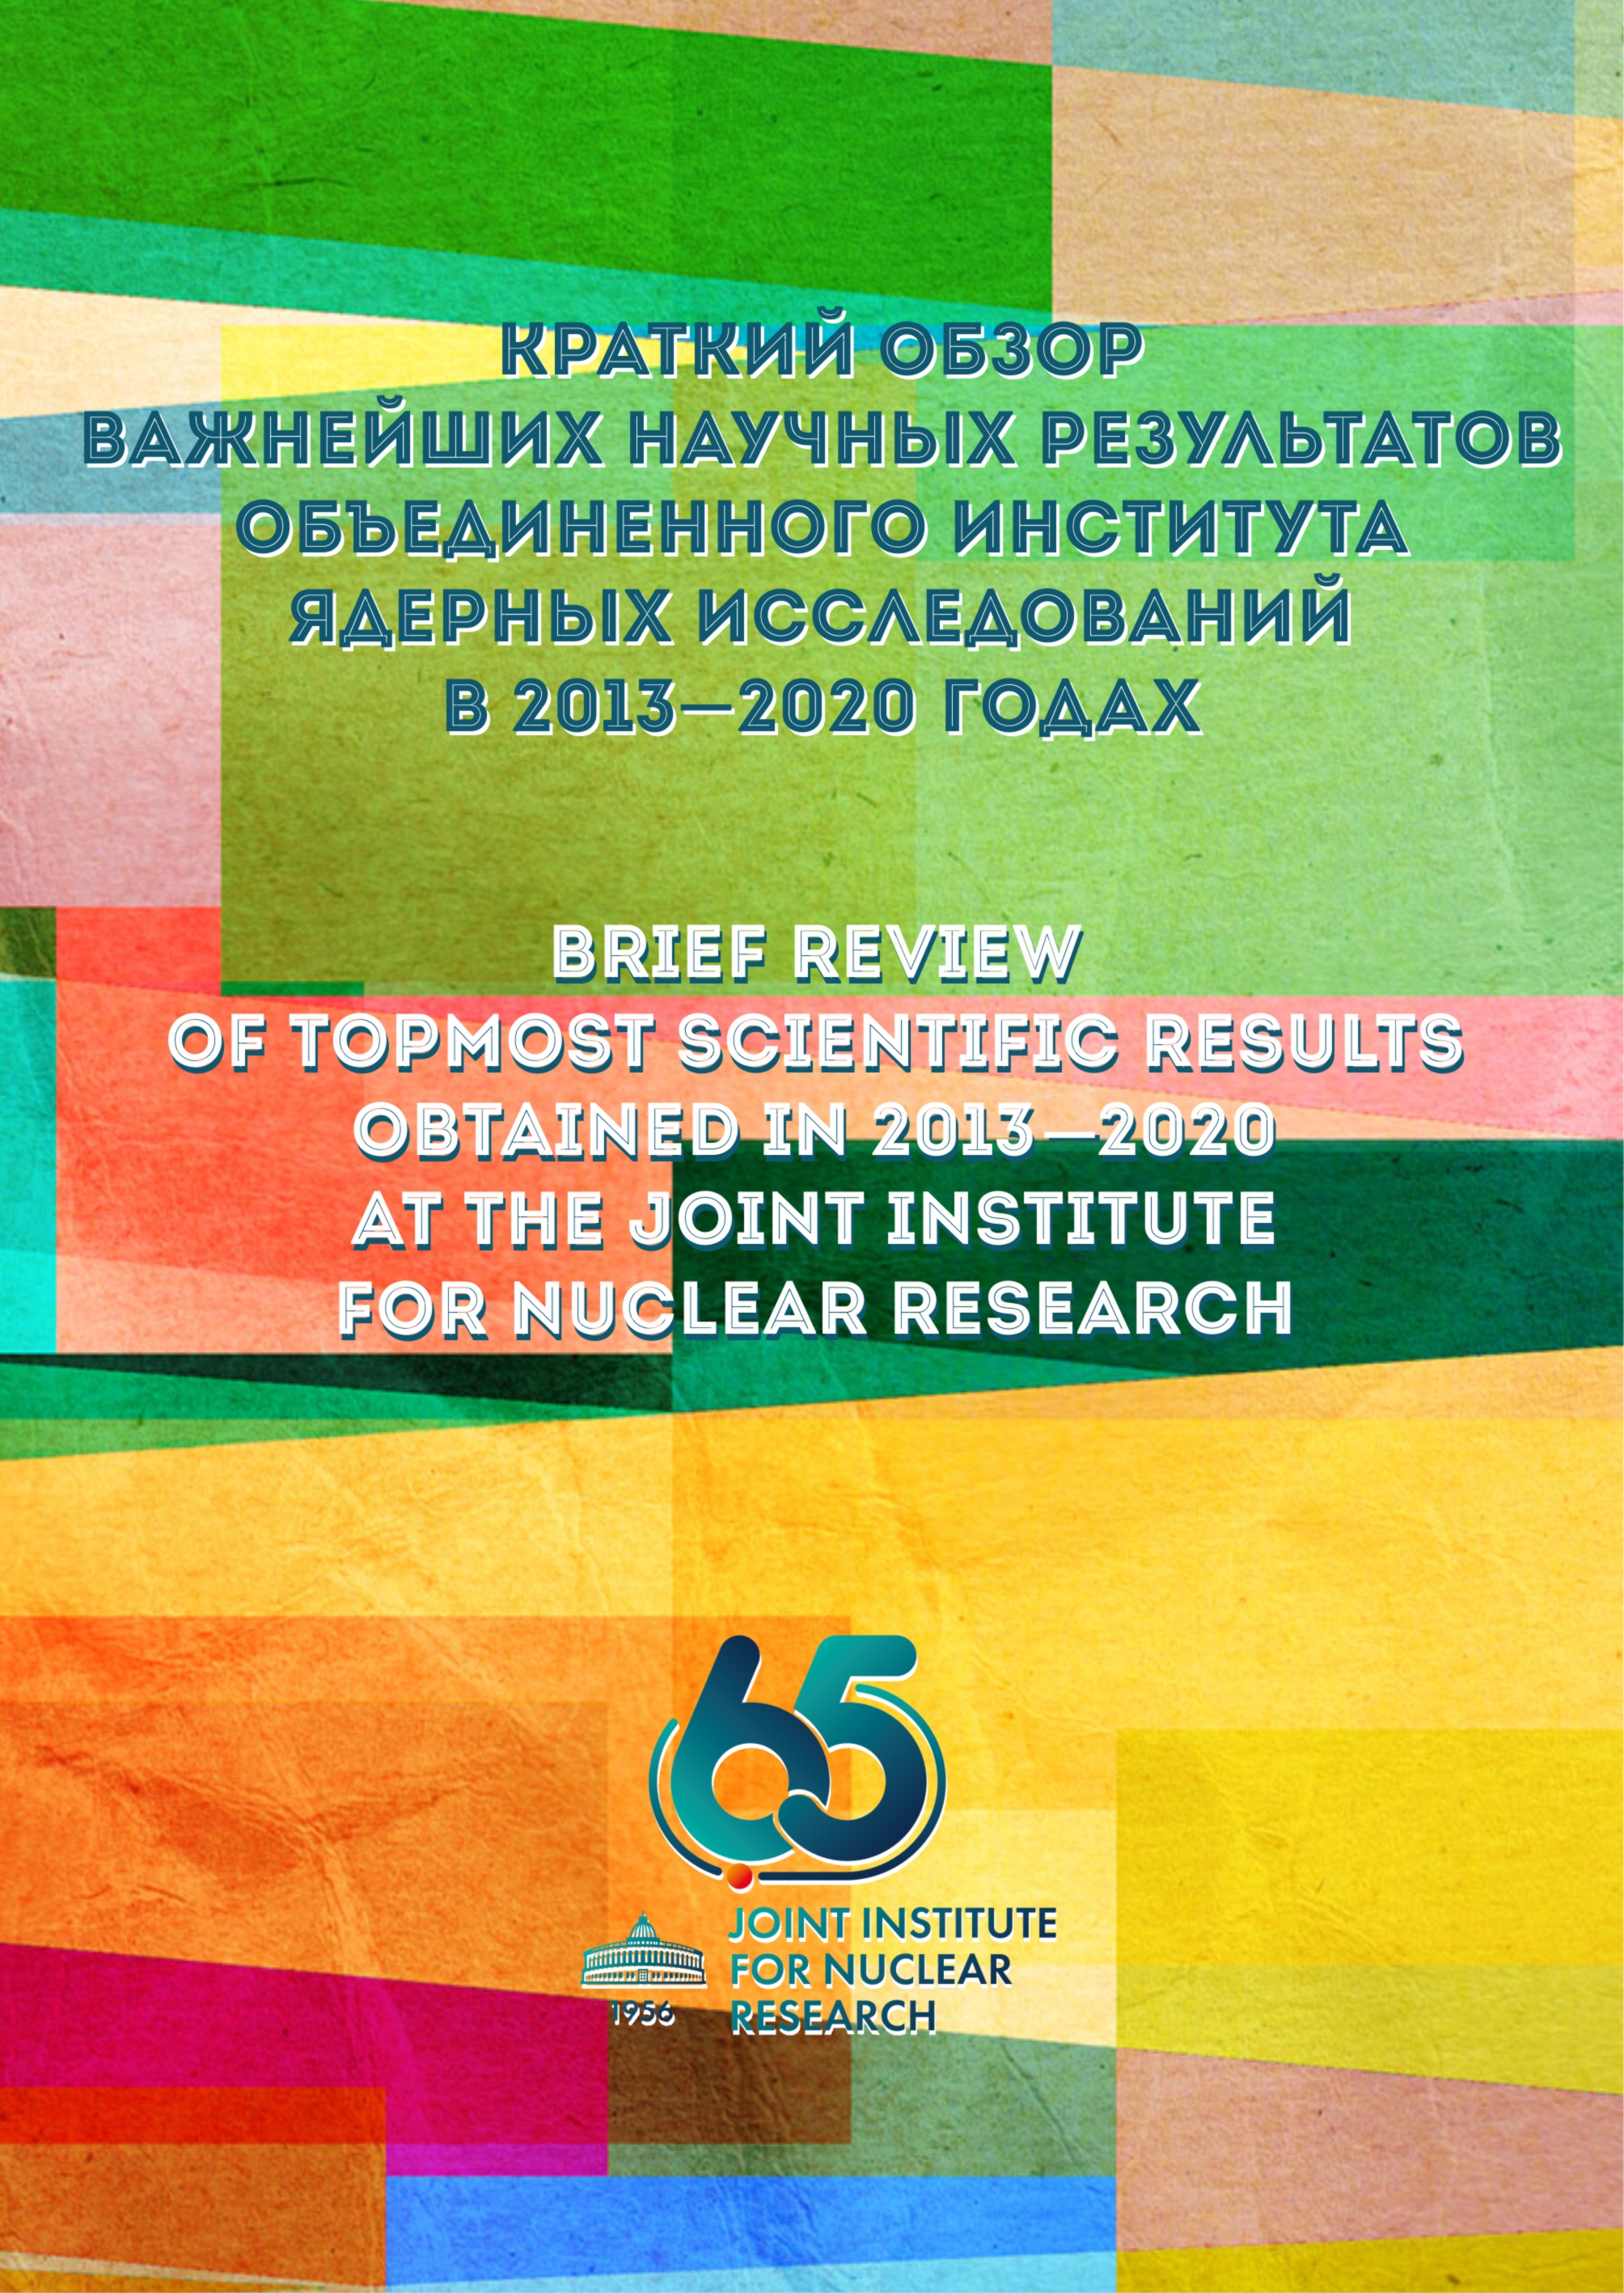 BRIEF REVIEW OF TOPMOST SCIENTIFIC RESULTS OBTAINED IN 2013-2020 AT THE JOINT INSTITUTE FOR NUCLEAR RESEARCH 